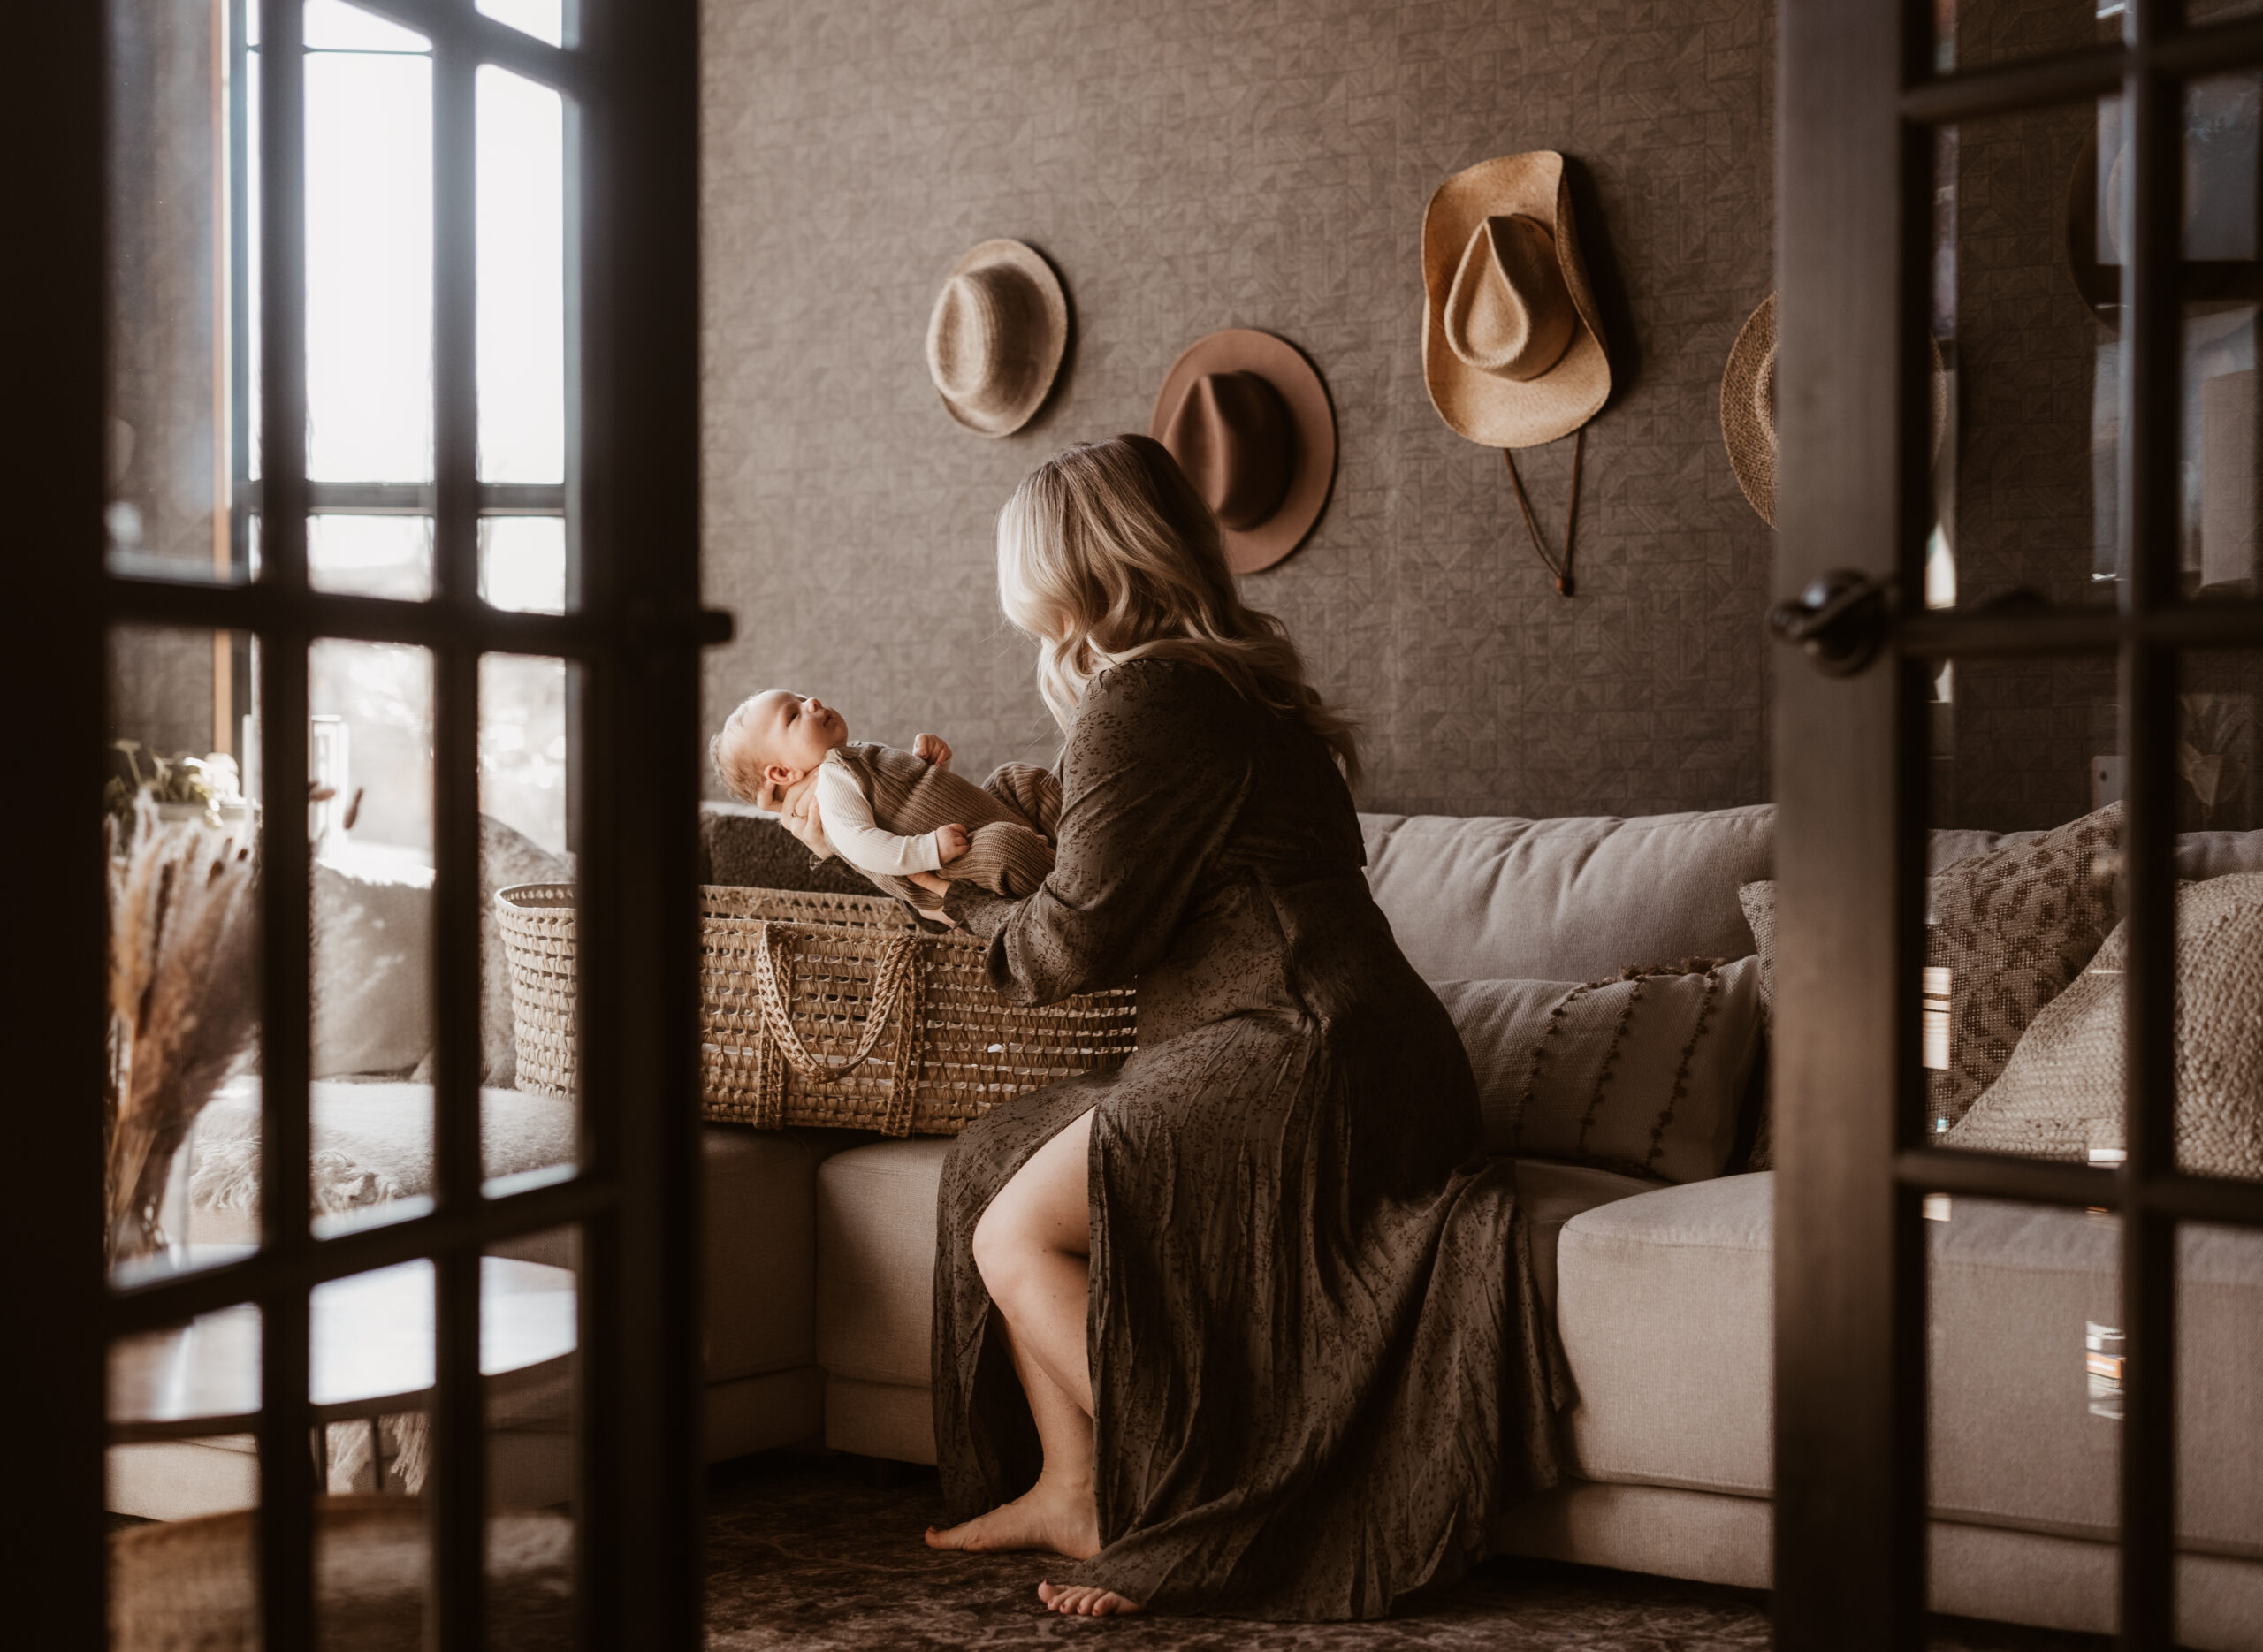 mom in dress places newborn baby in basket in living room